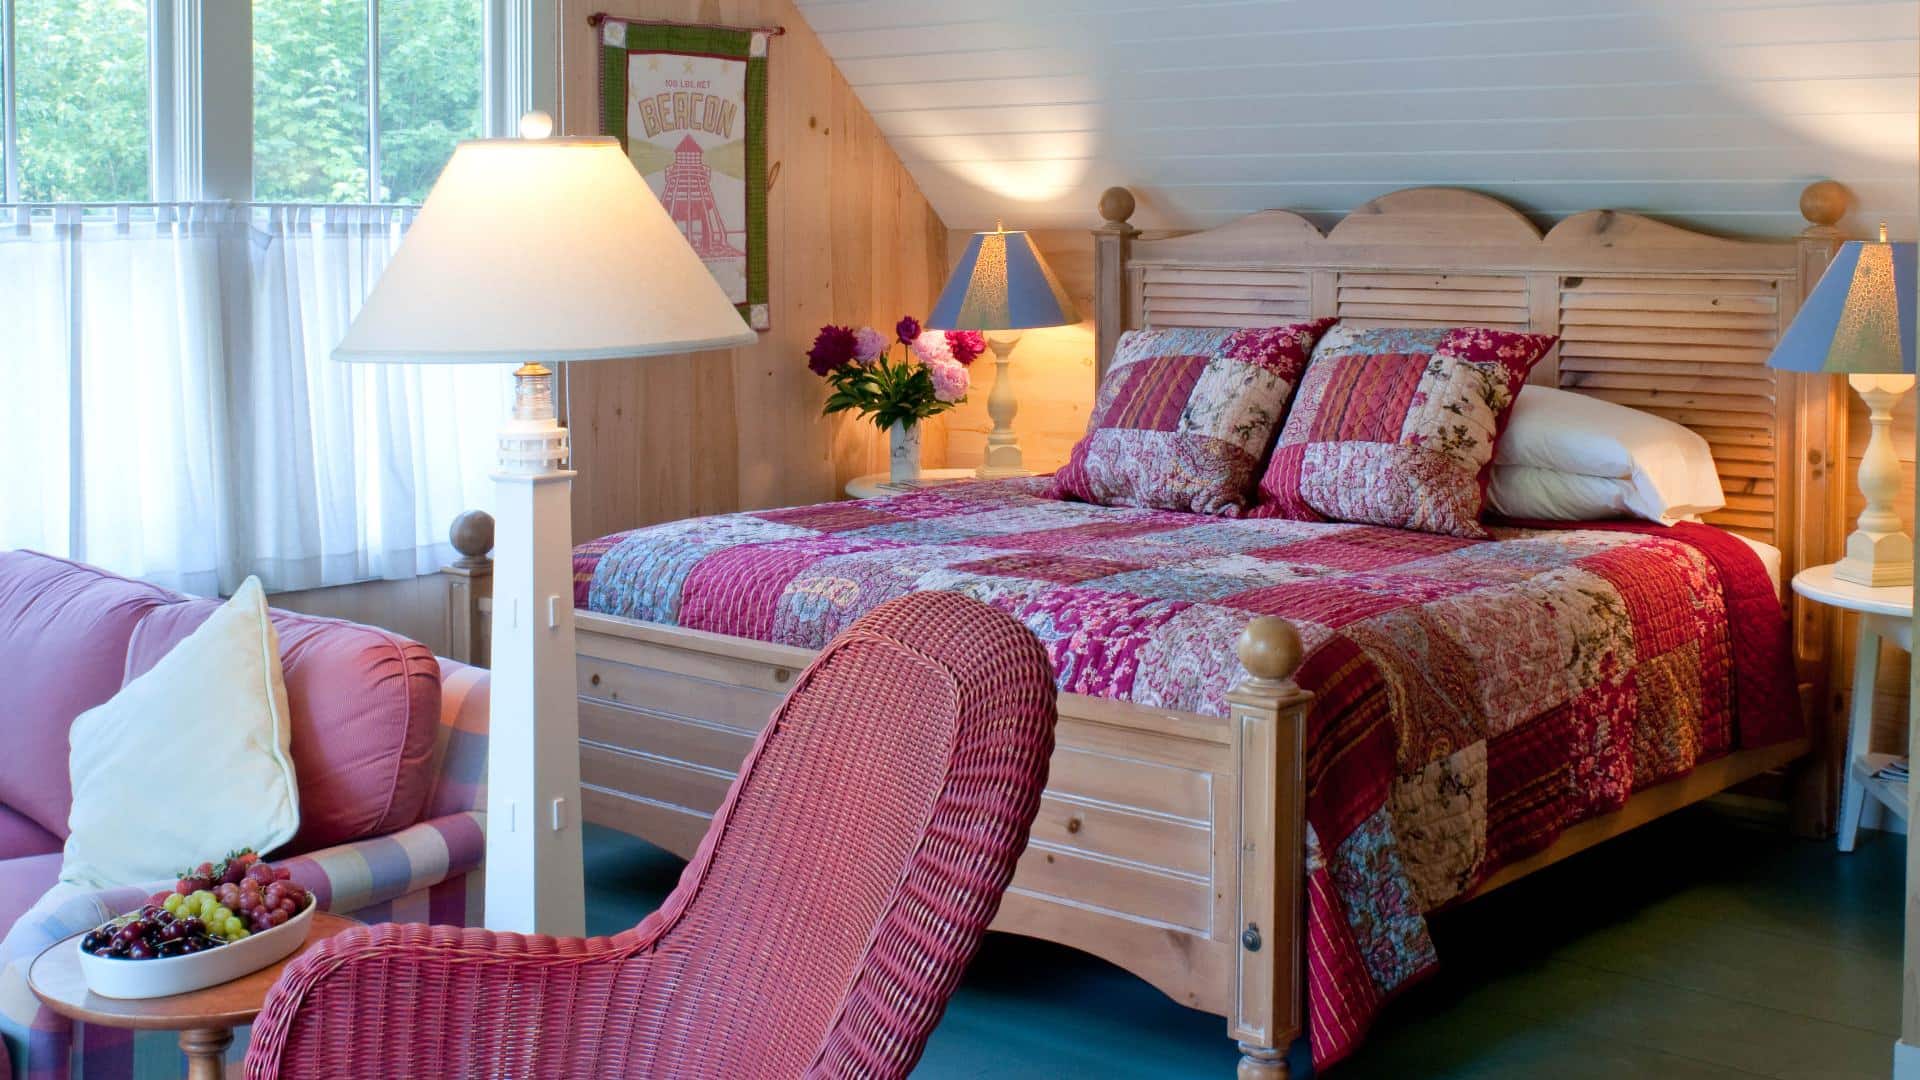 Pretty bedroom decorated in pinks and greens, with a sloped ceiling and large wooden bed.